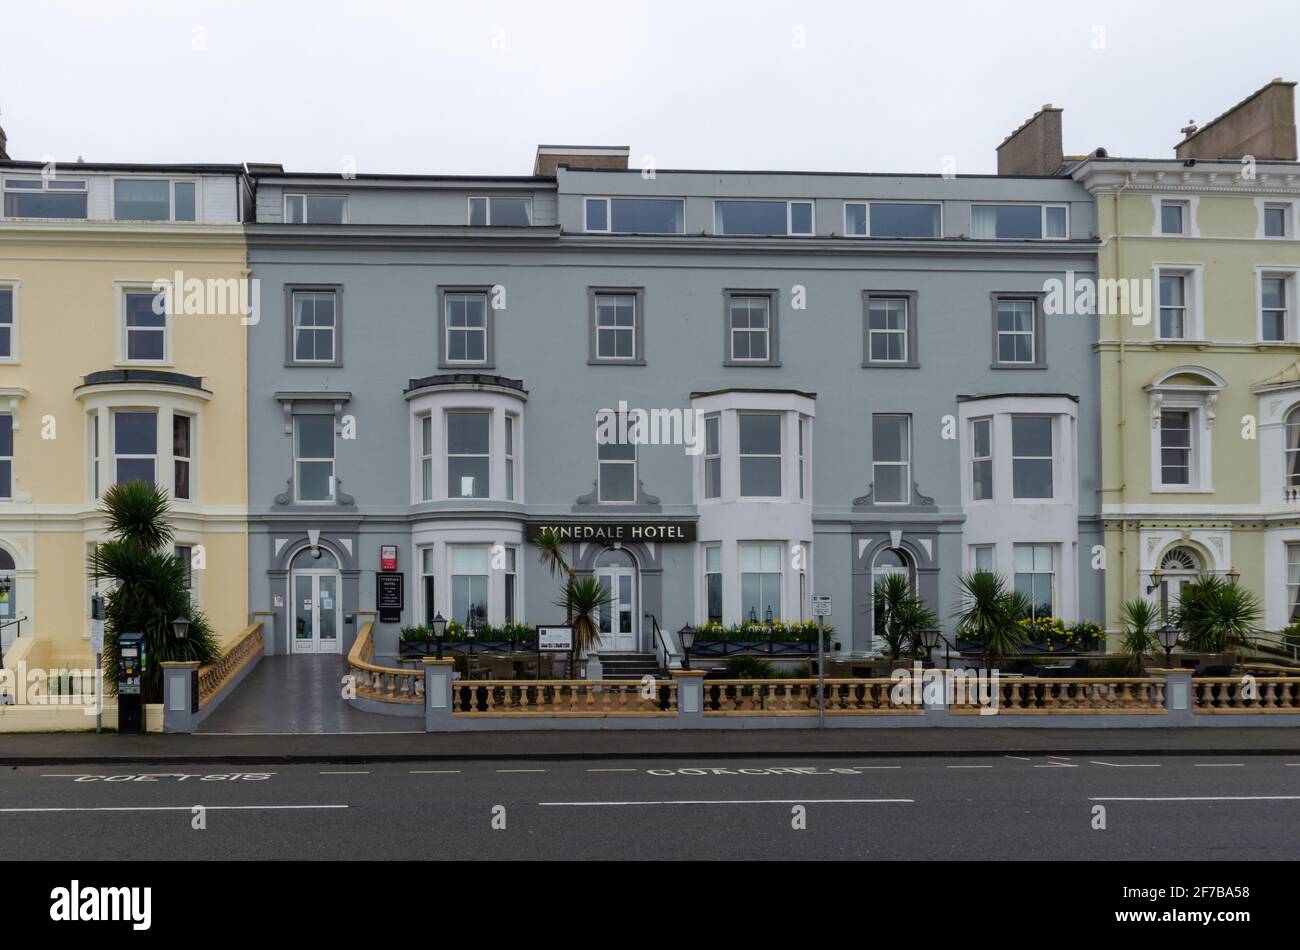 Llandudno, UK: Mar 18, 2021: The Tynedale Hotel located on the promenade is independently owned accommodation. The hotel has been offering mock cruise Stock Photo